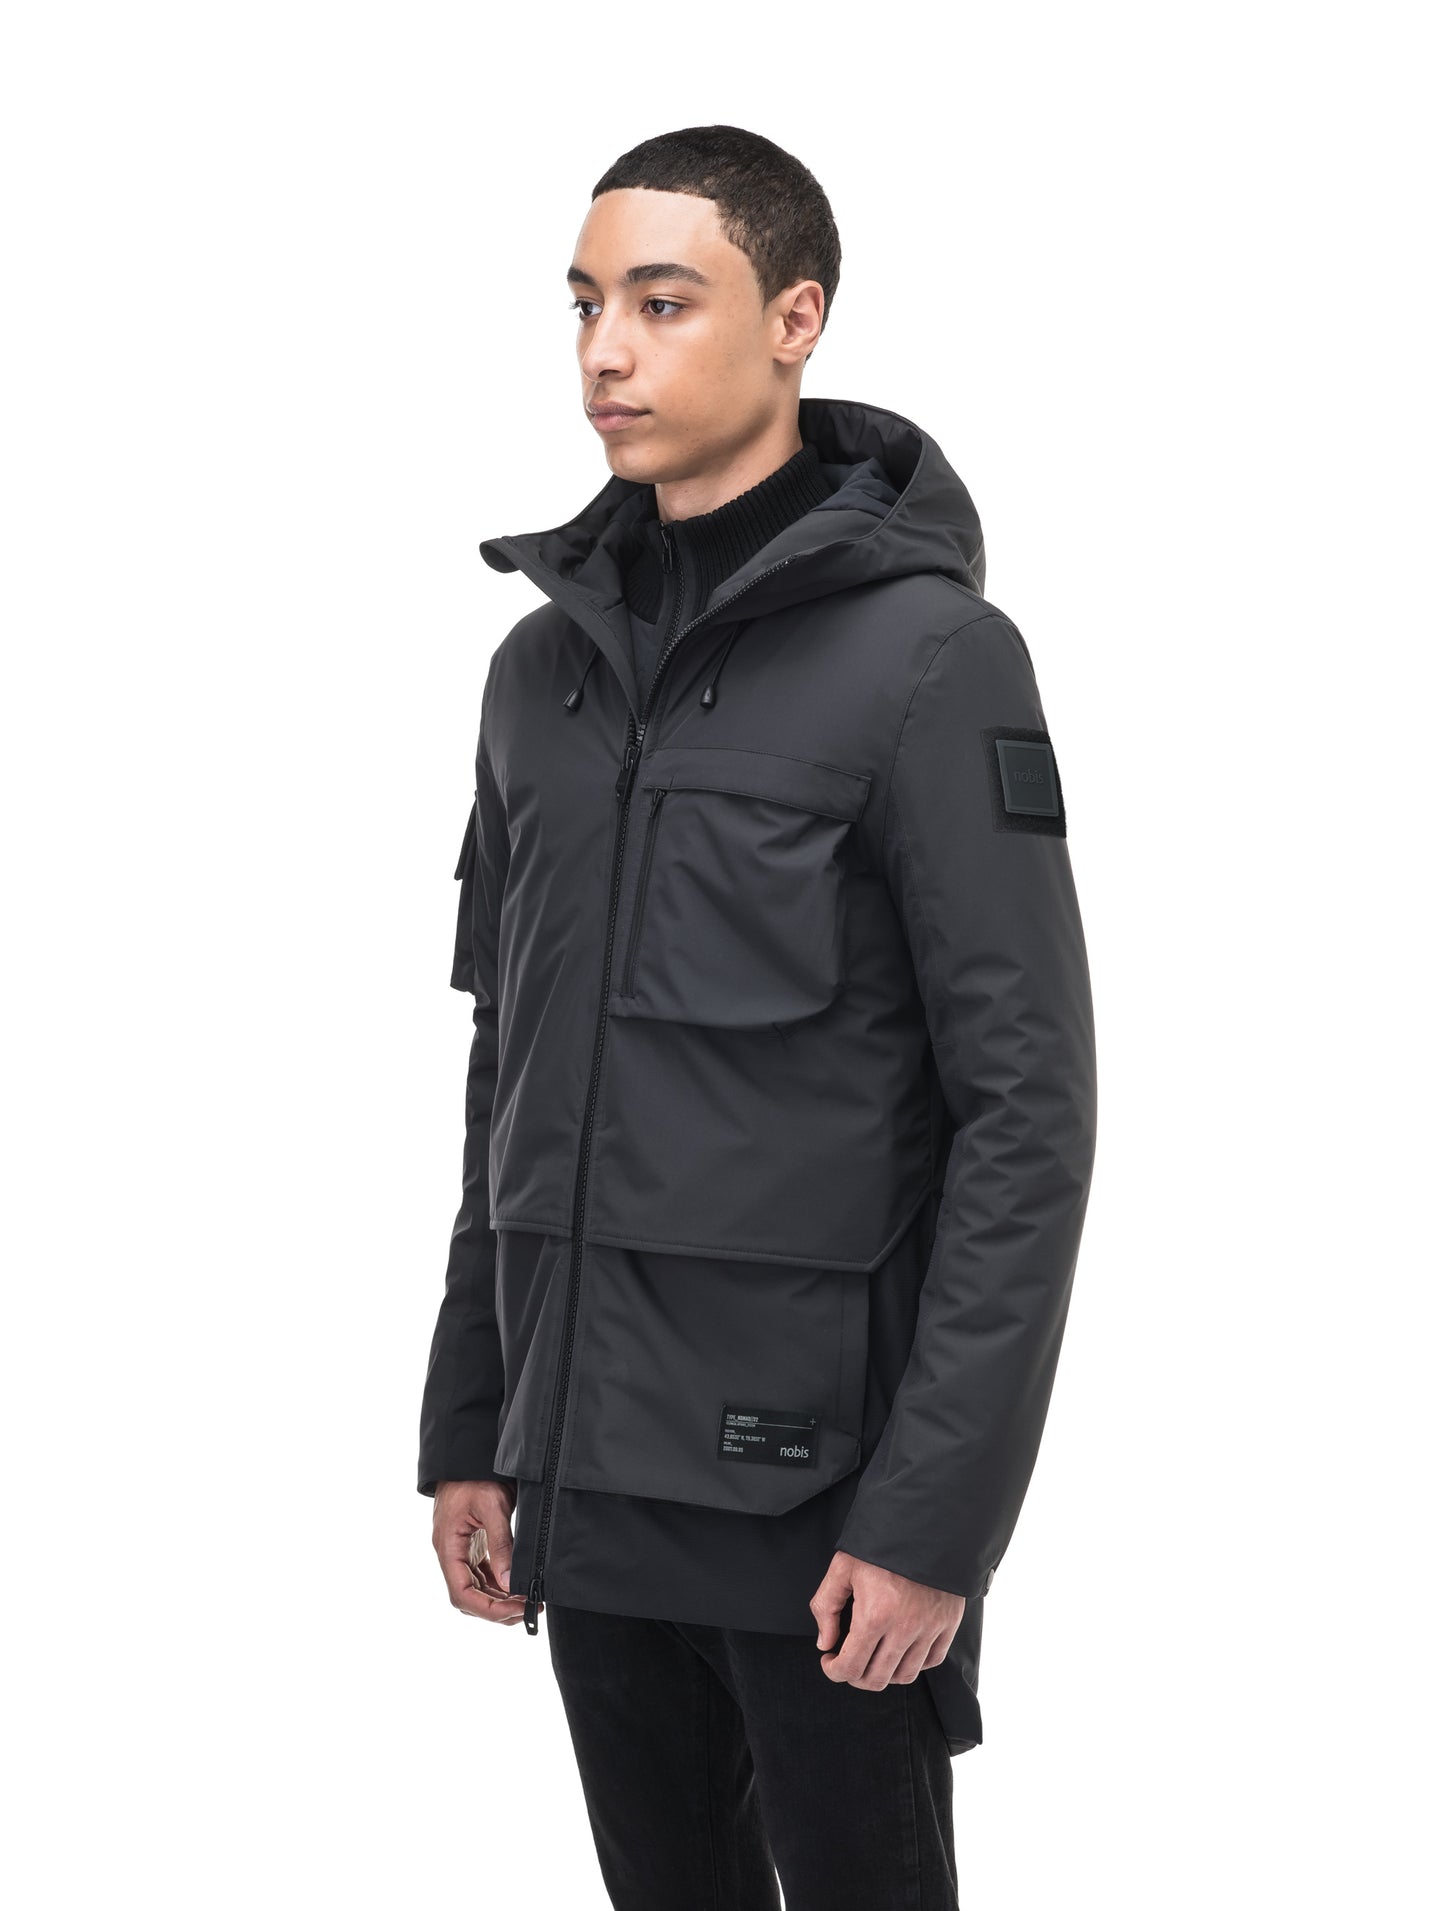 Alta Men's Performance Shell Jacket in hip length, Primaloft Gold Insulation Active+, chest and waist pockets, ventilation under arms, reflective detailing on hood and back, two-way front zipper, and non-removable hood with adjustable drawstrings, in Black